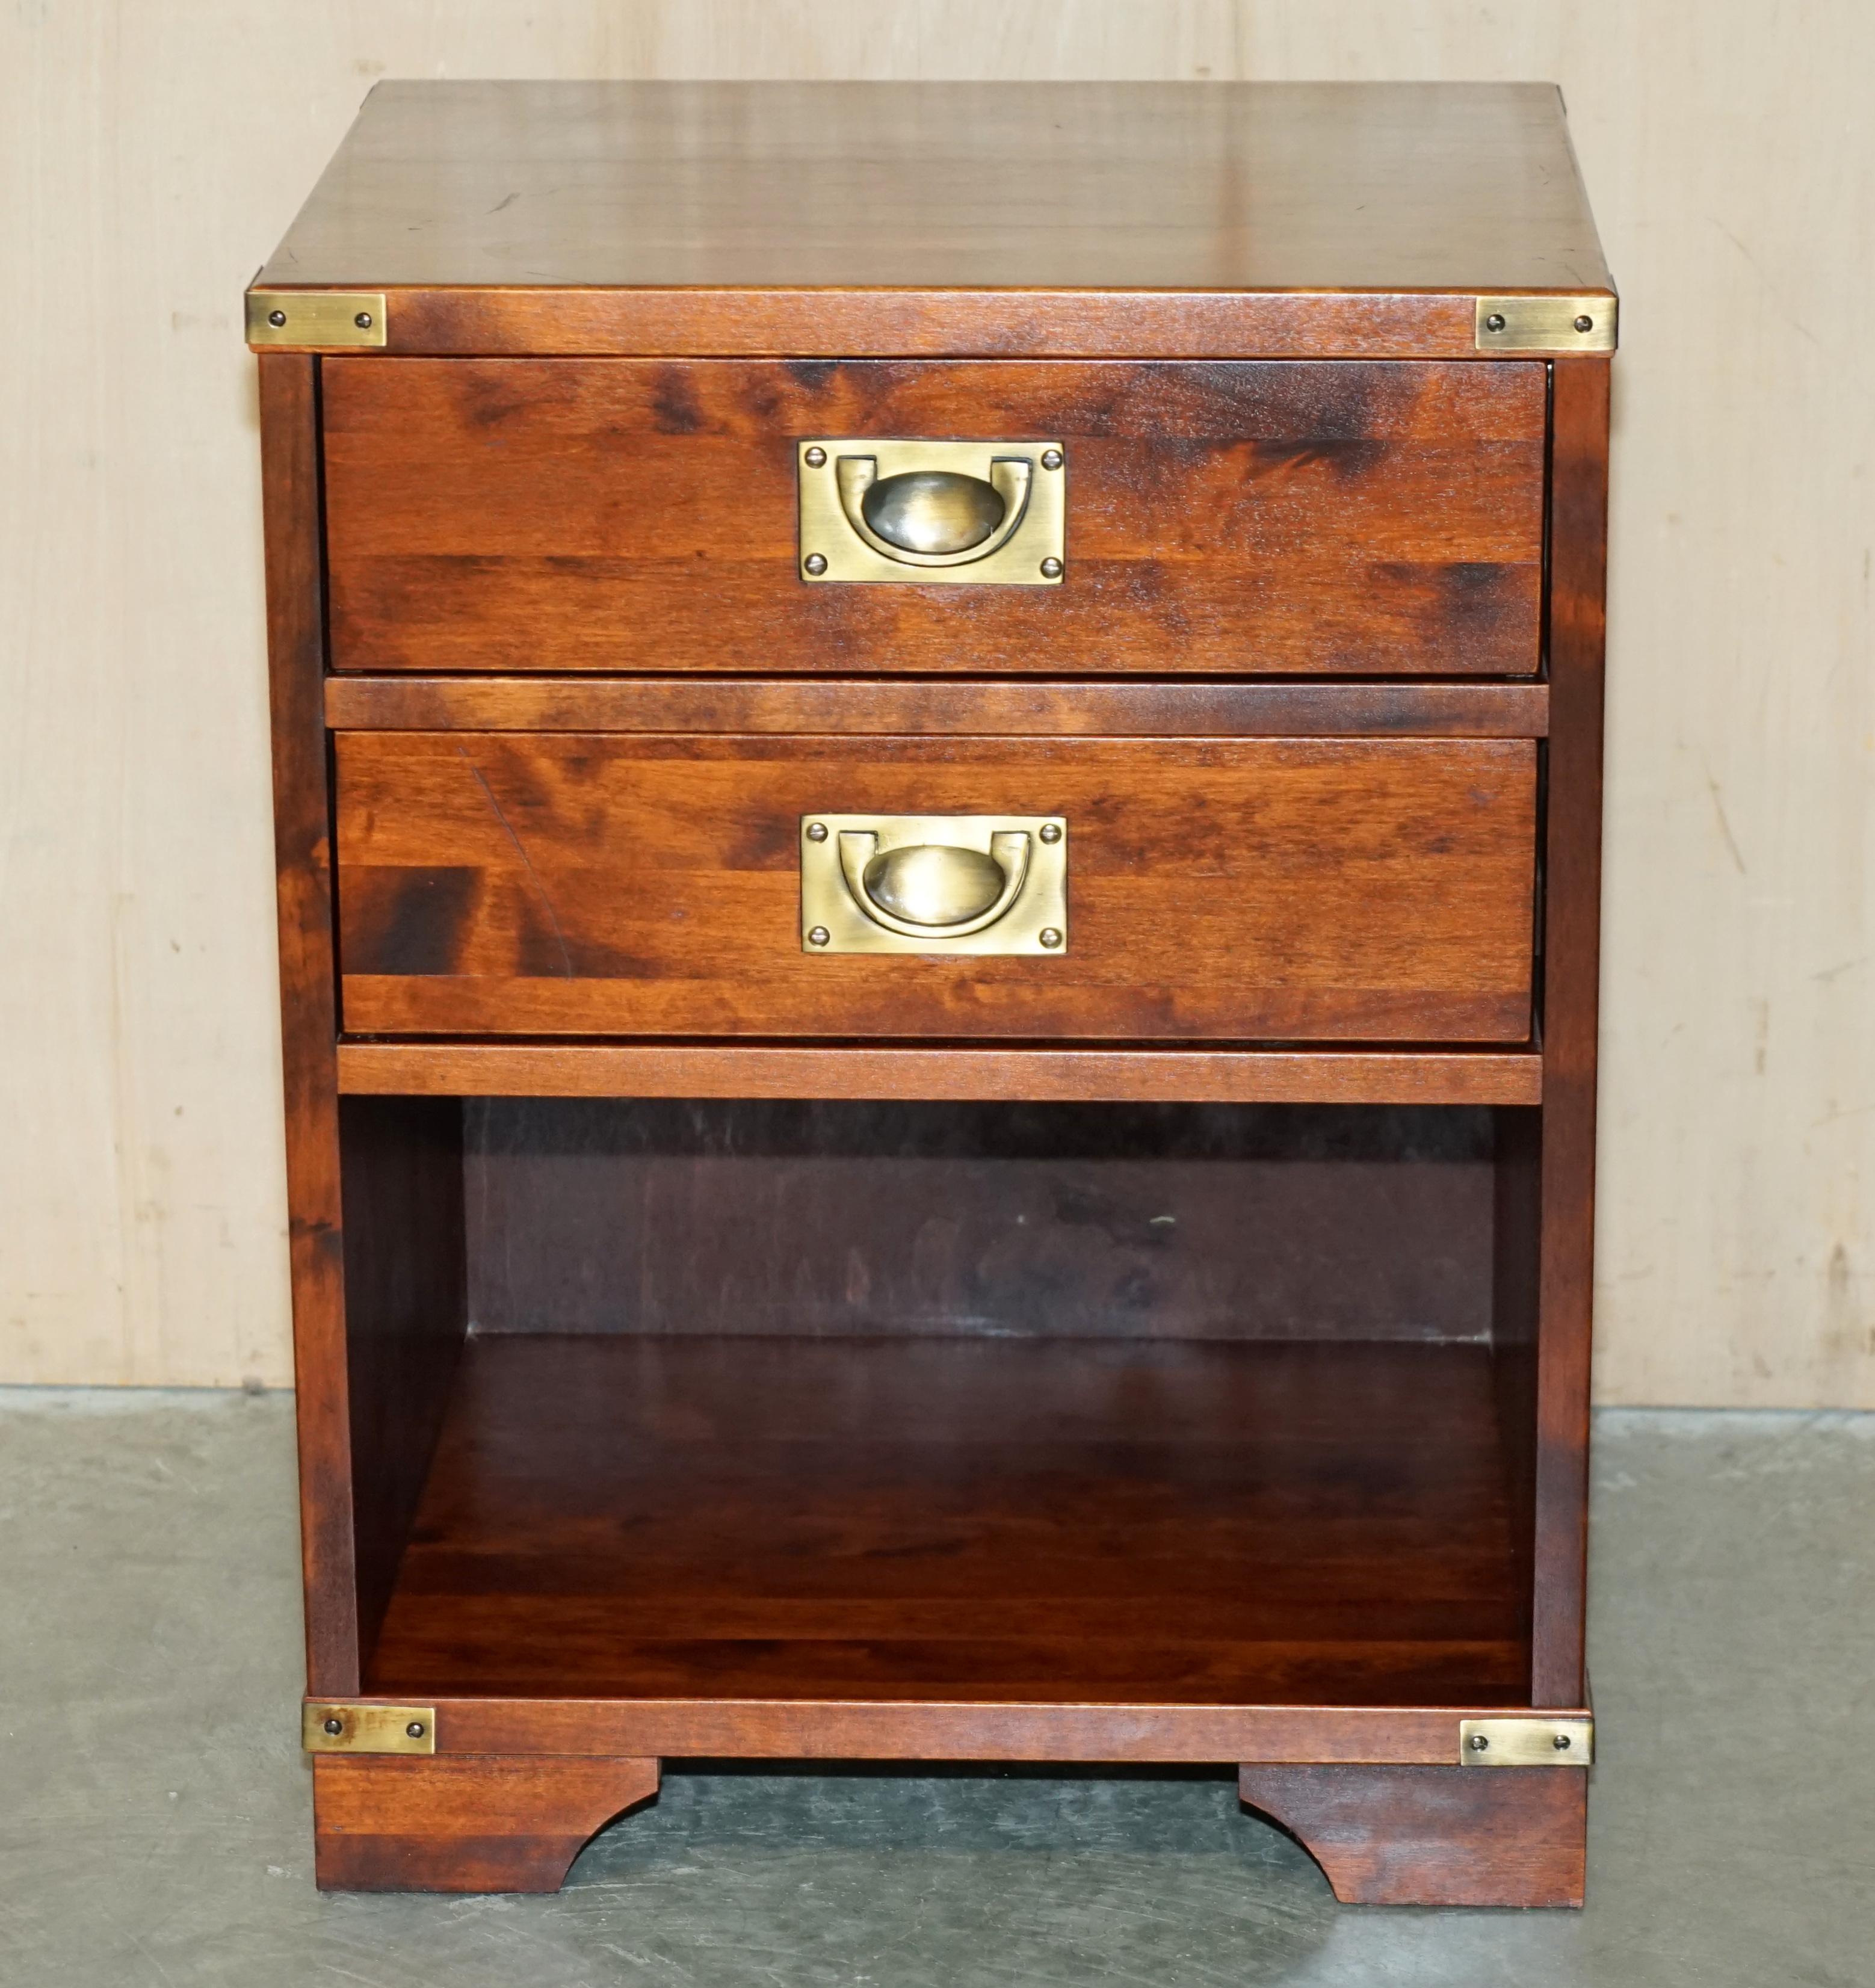 English PAiR OF MILIARY CAMPAIGN SIDE END LAMP WINE BEDSIDE TABLE CHESTS WITH DRAWERS For Sale